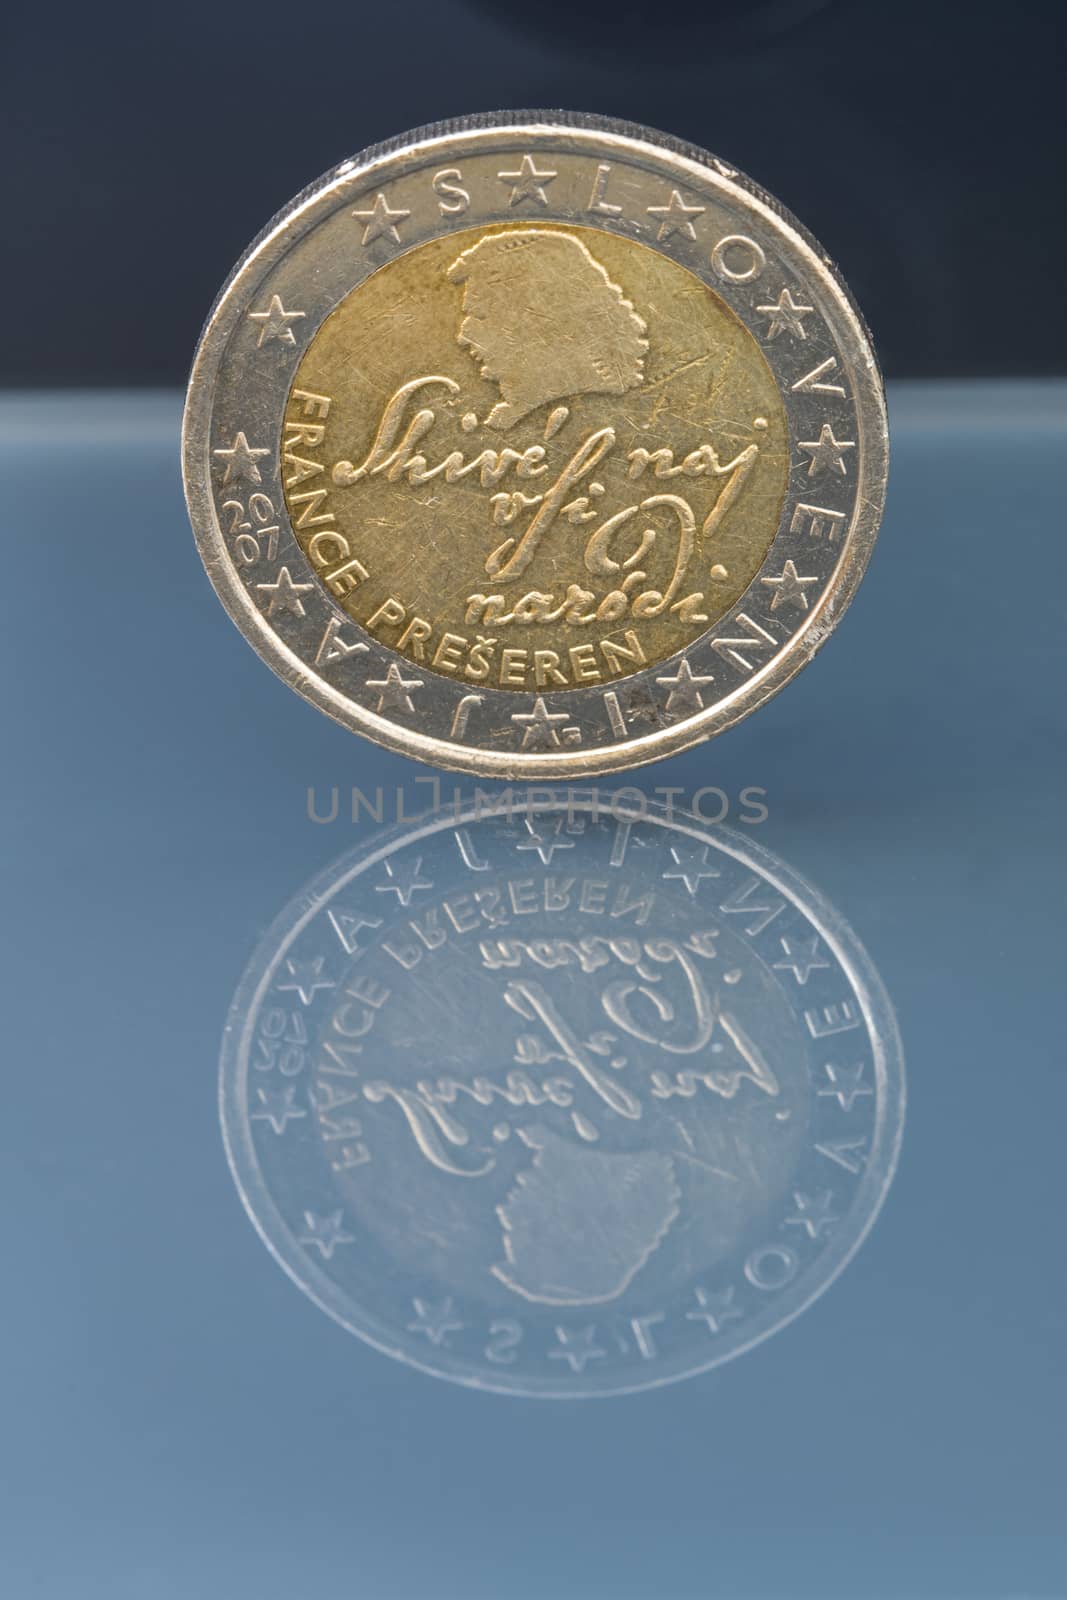 2 EUR coin, Slovenia, depicting famous poet France Preseren, issued in 2007